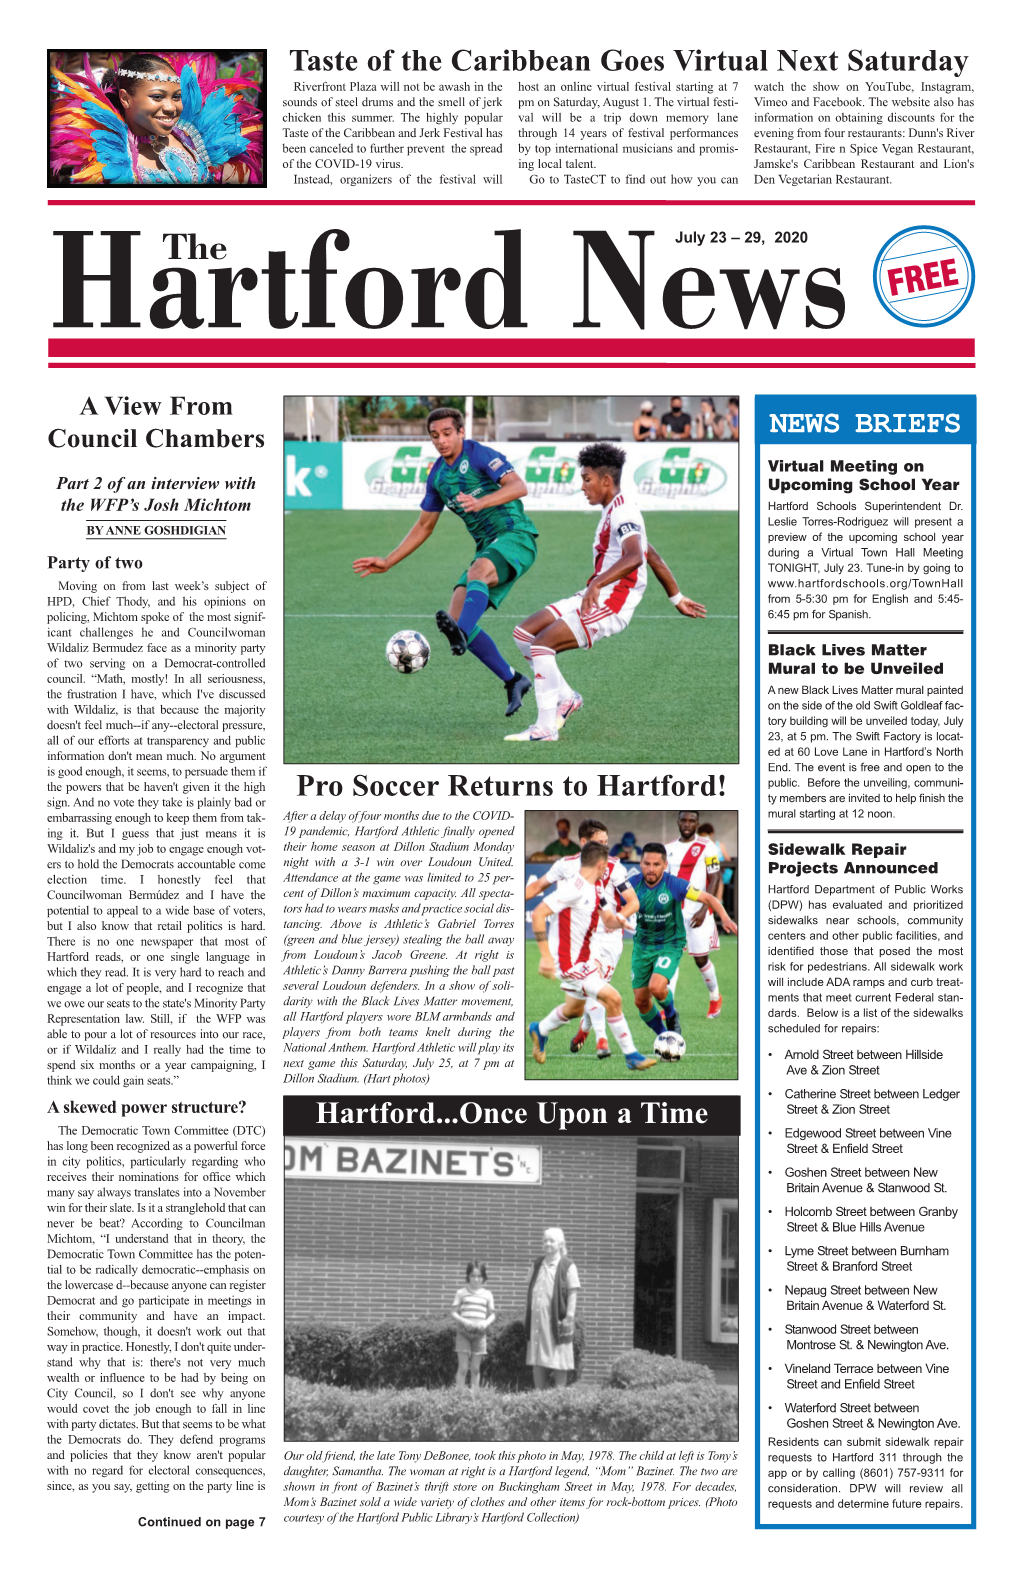 Hartford...Once Upon a Time NEWS BRIEFS Pro Soccer Returns To